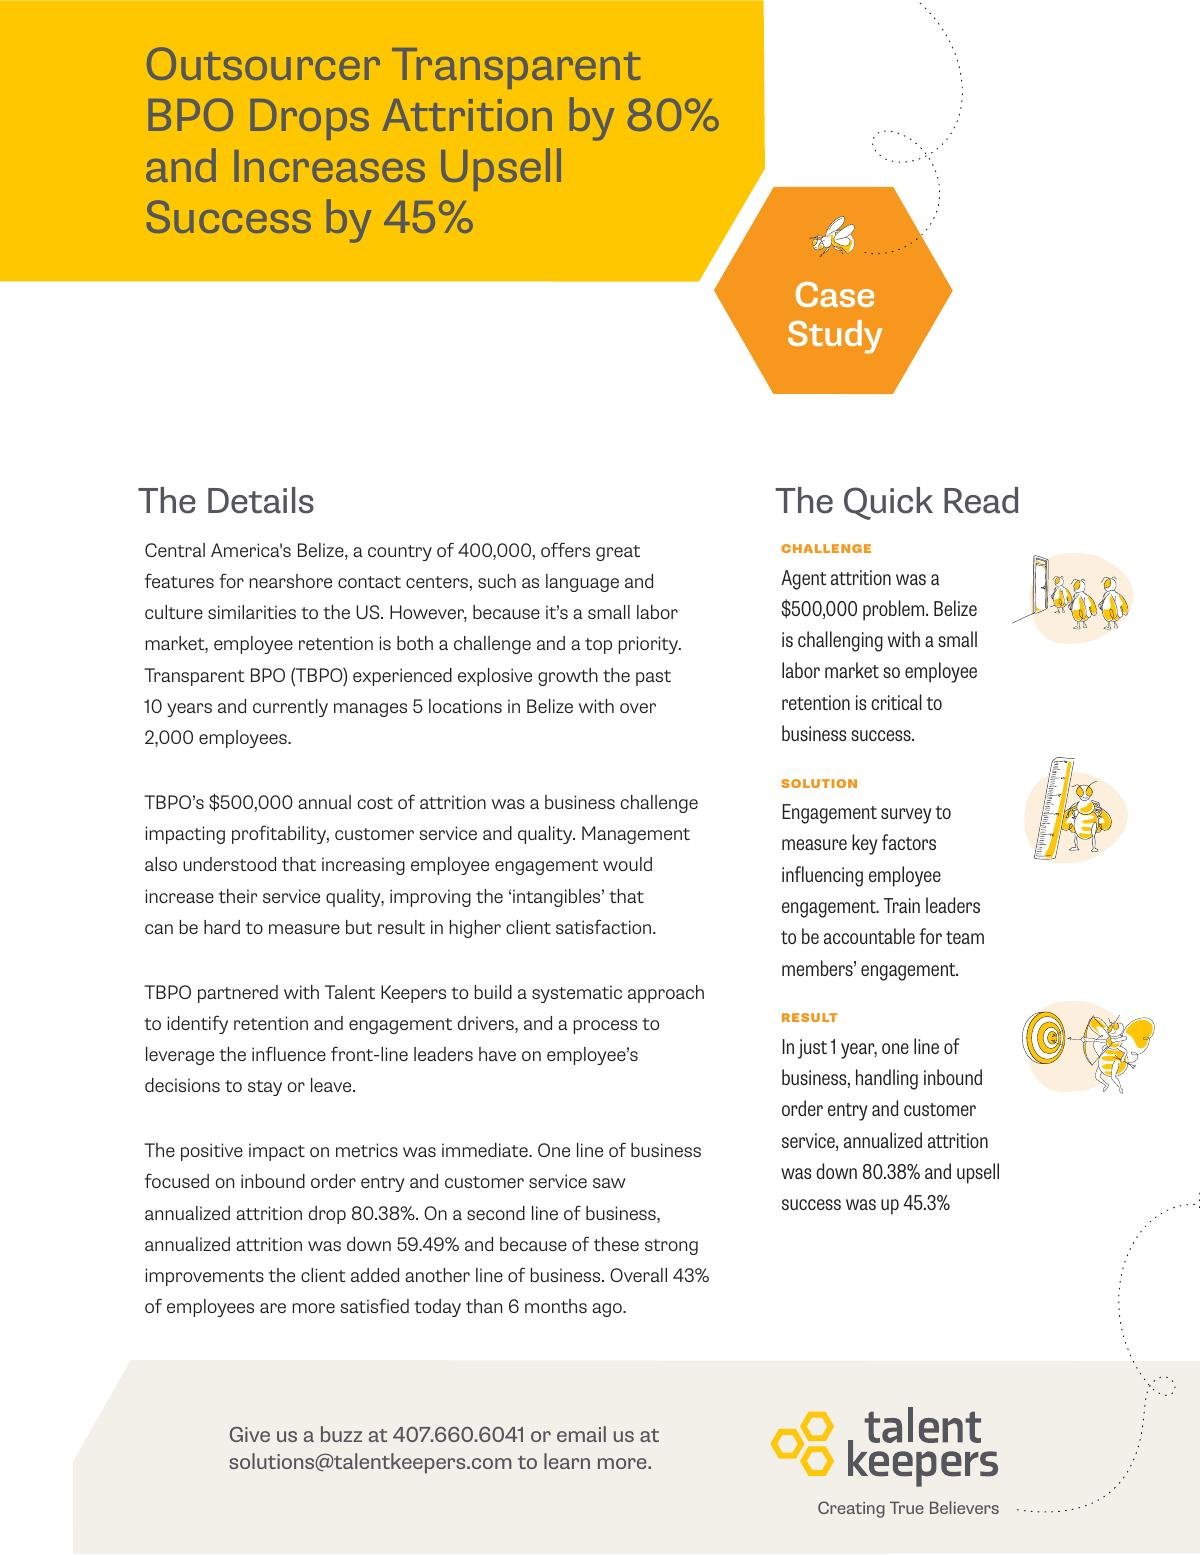 Outsourcer Transparent BPO Drops Attrition by 80% and Increases Upsell Success by 45%